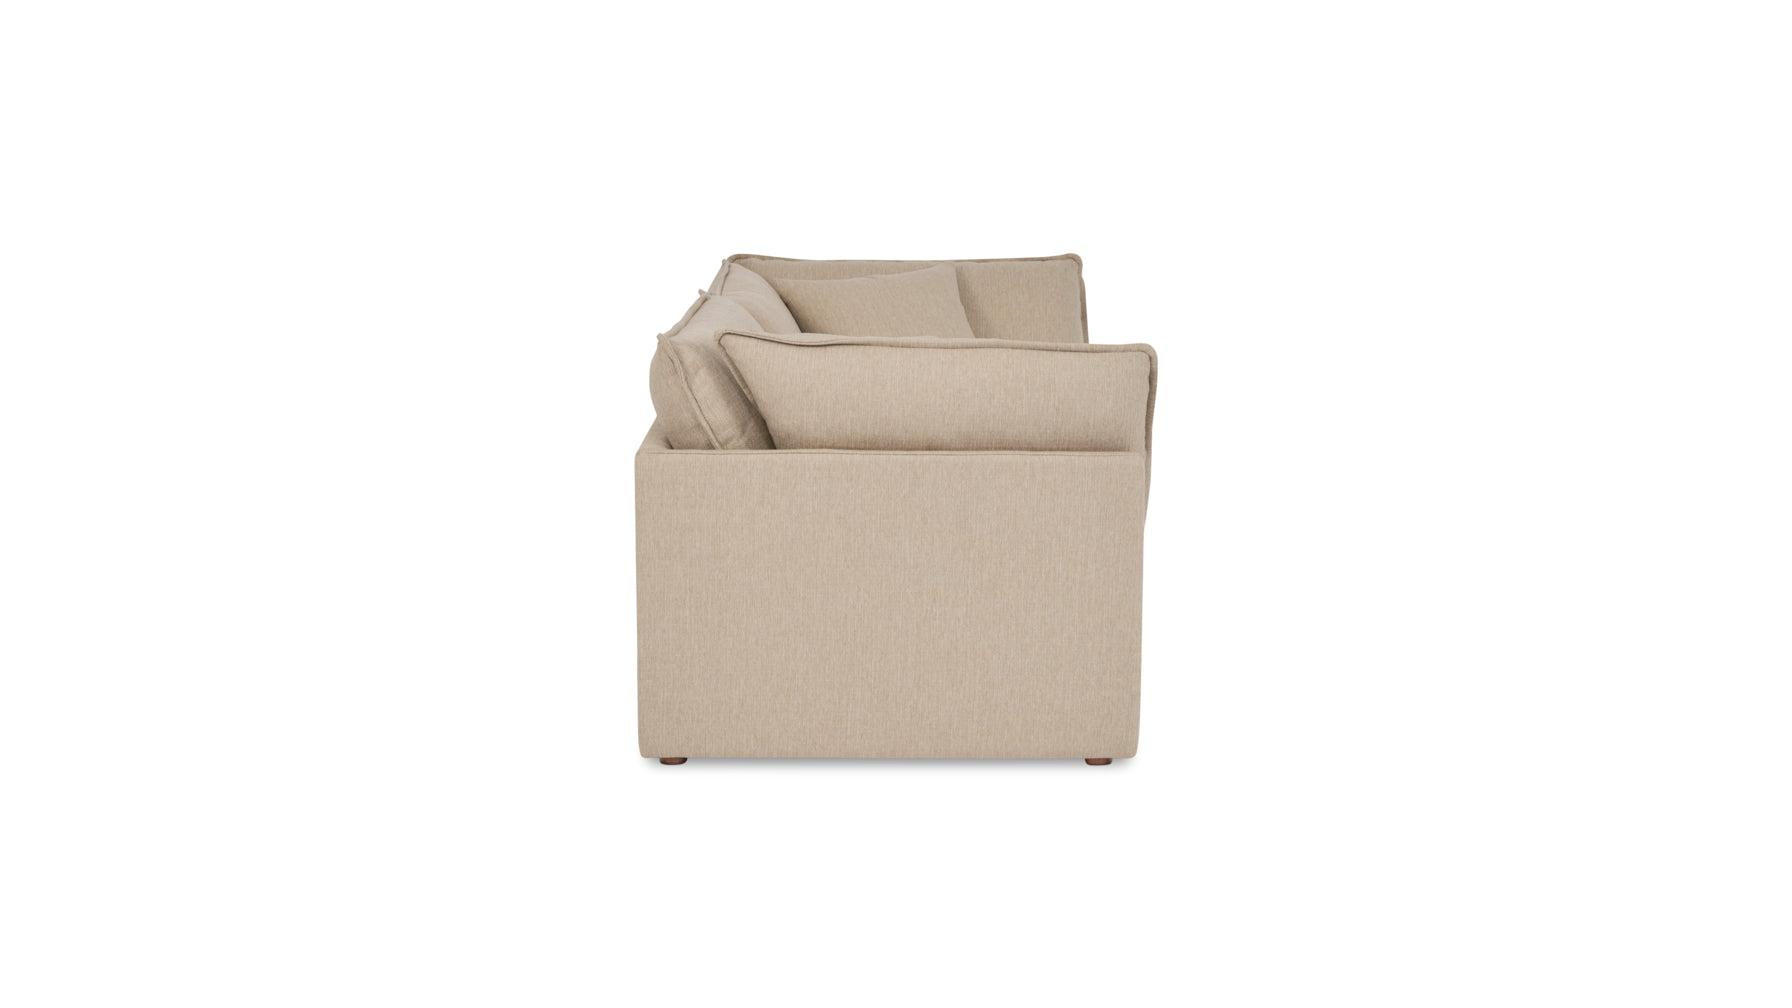 Chill Time 2-Piece Modular Sofa, Biscuit - Image 3